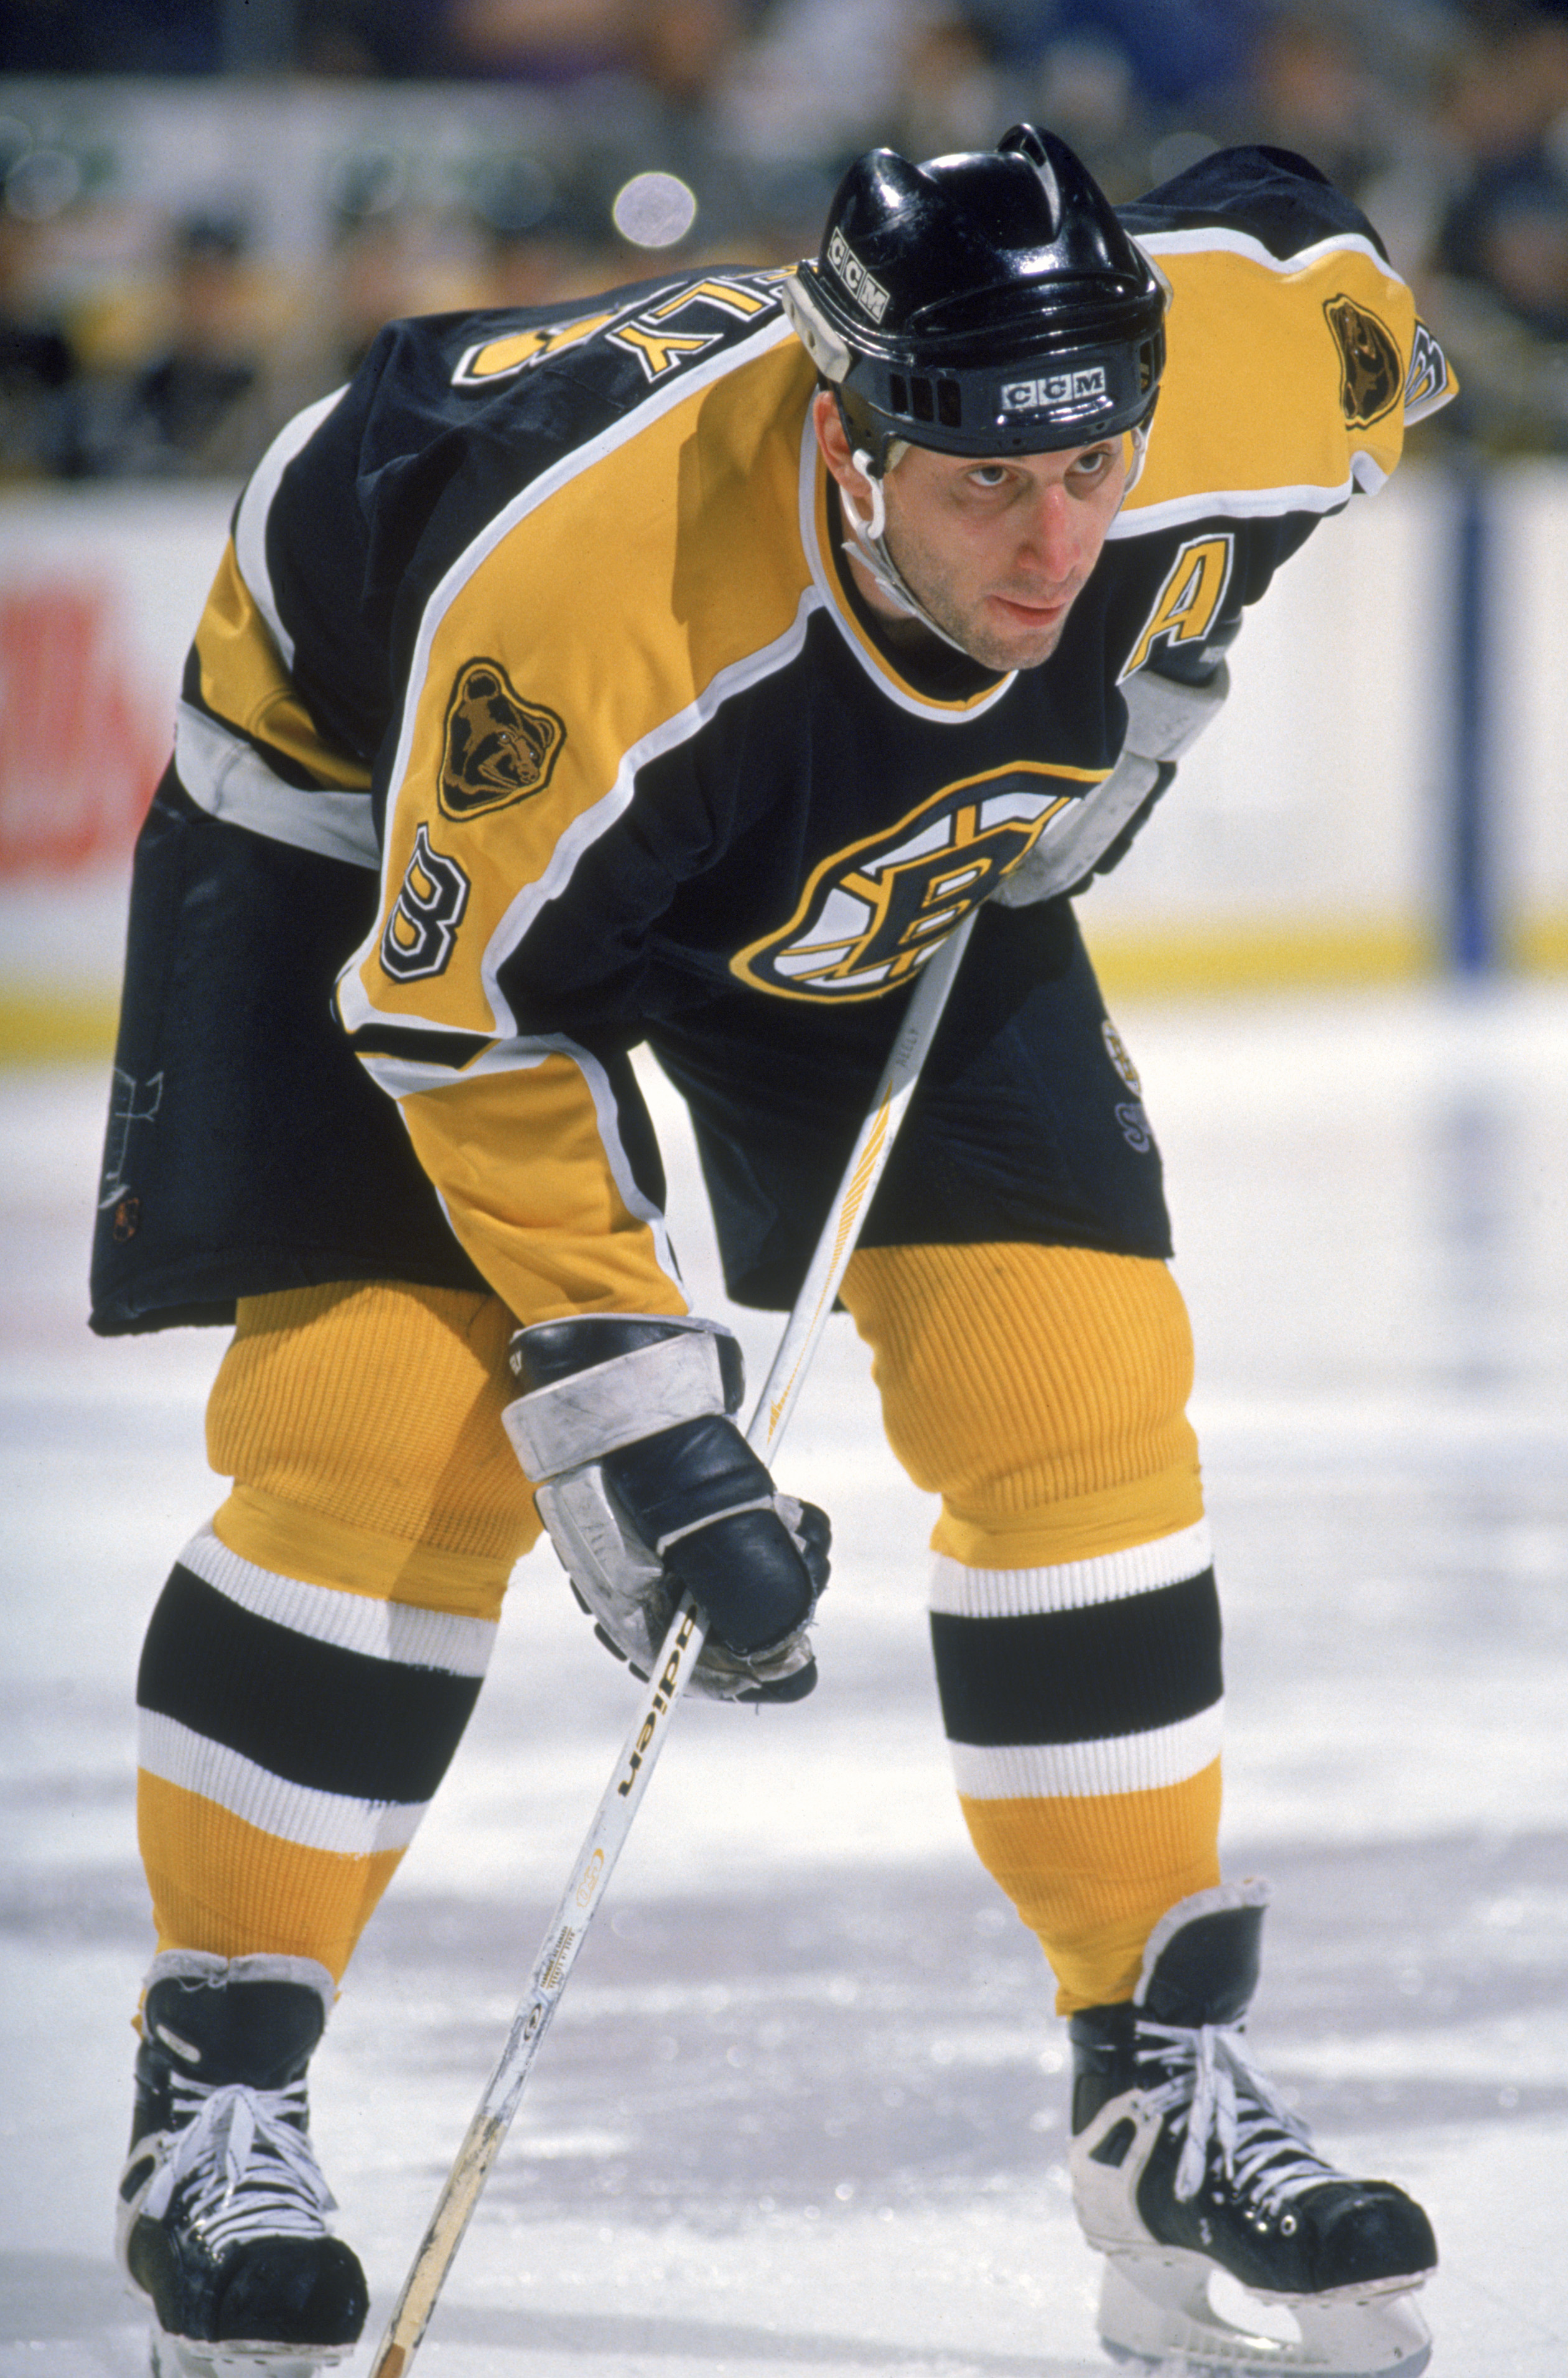 BUFFALO, NY - FEBRUARY 7:  Cam Neely #8 of the Boston Bruins lines up for the faceoff against the Buffalo Sabres at Memorial Auditorium on February 7, 1996 in Buffalo, New York. The Bruins defeated the Sabres 3-2. (Photo by Rick Stewart/Getty Images)